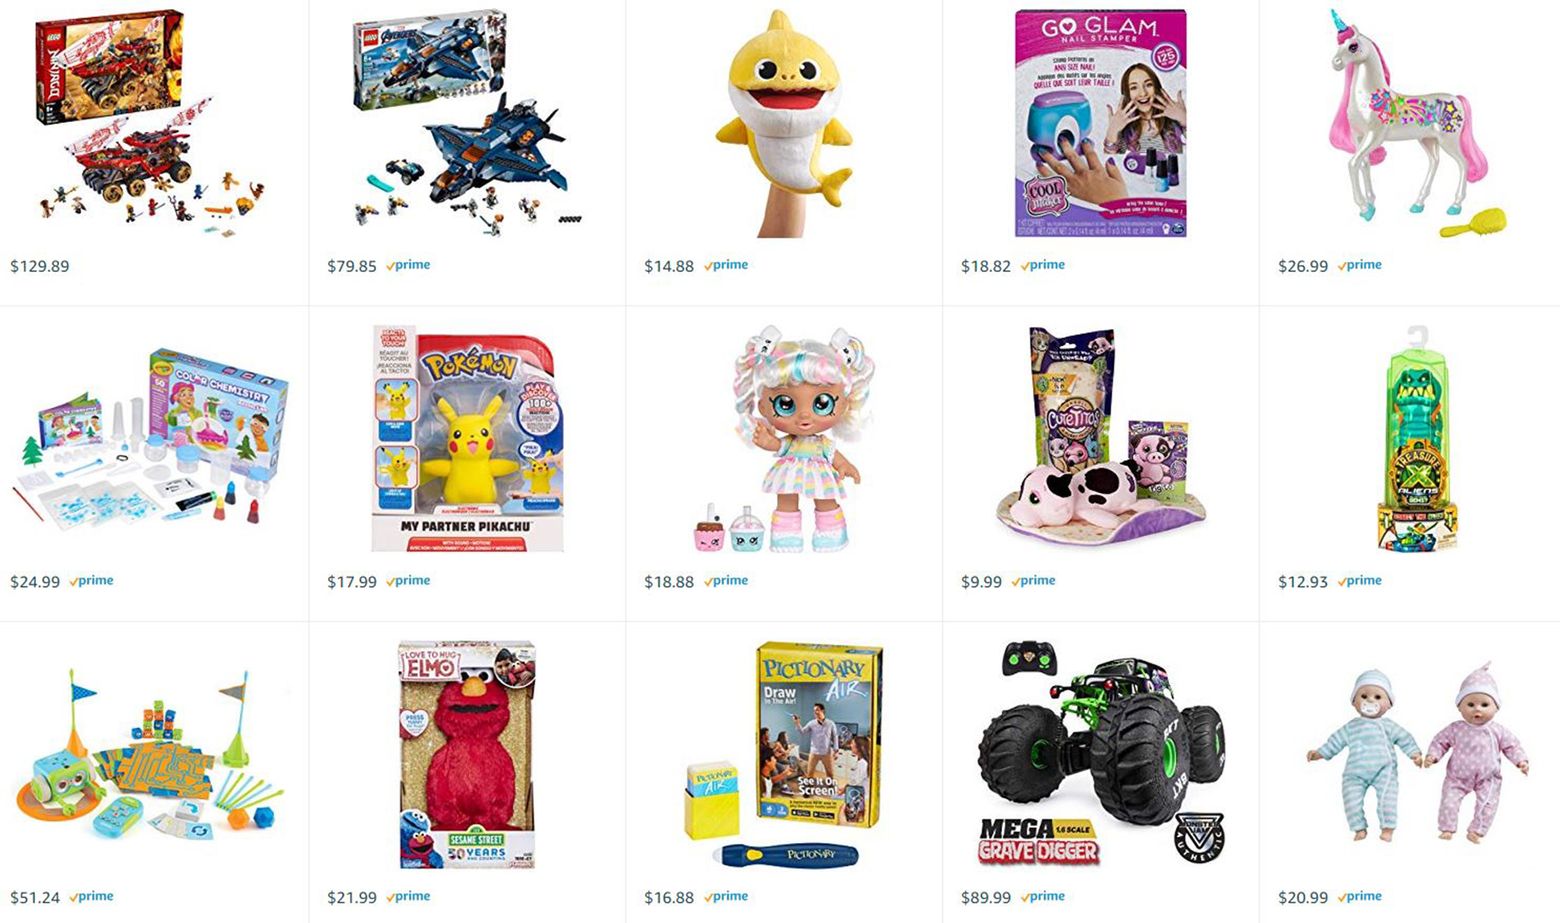 Amazon Holiday Toy List Slots Can Cost Brands Up To 2 Million The Seattle Times